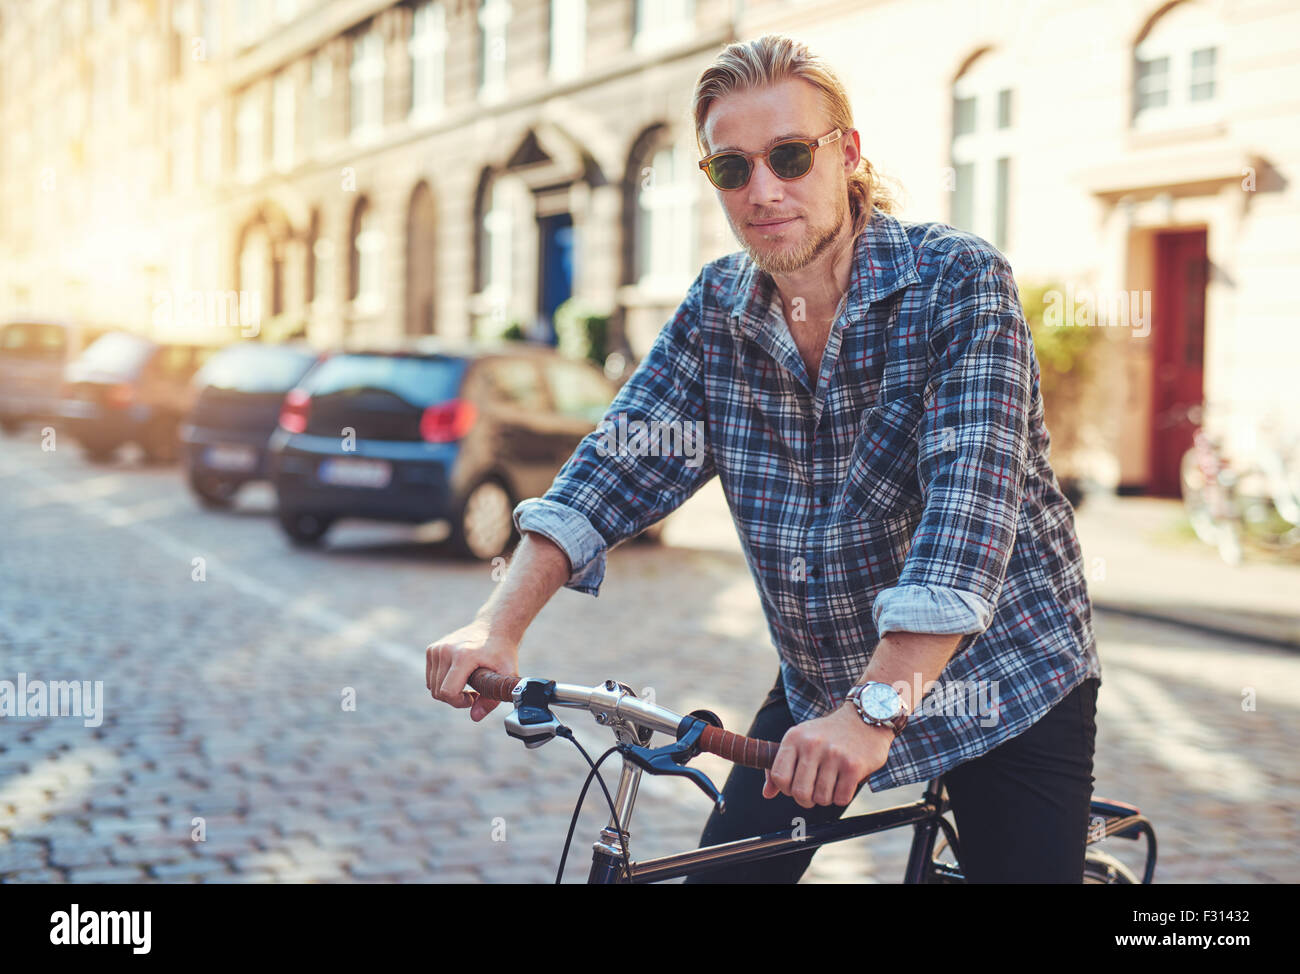 Young man on his bike in the city getting ready to ride Stock Photo